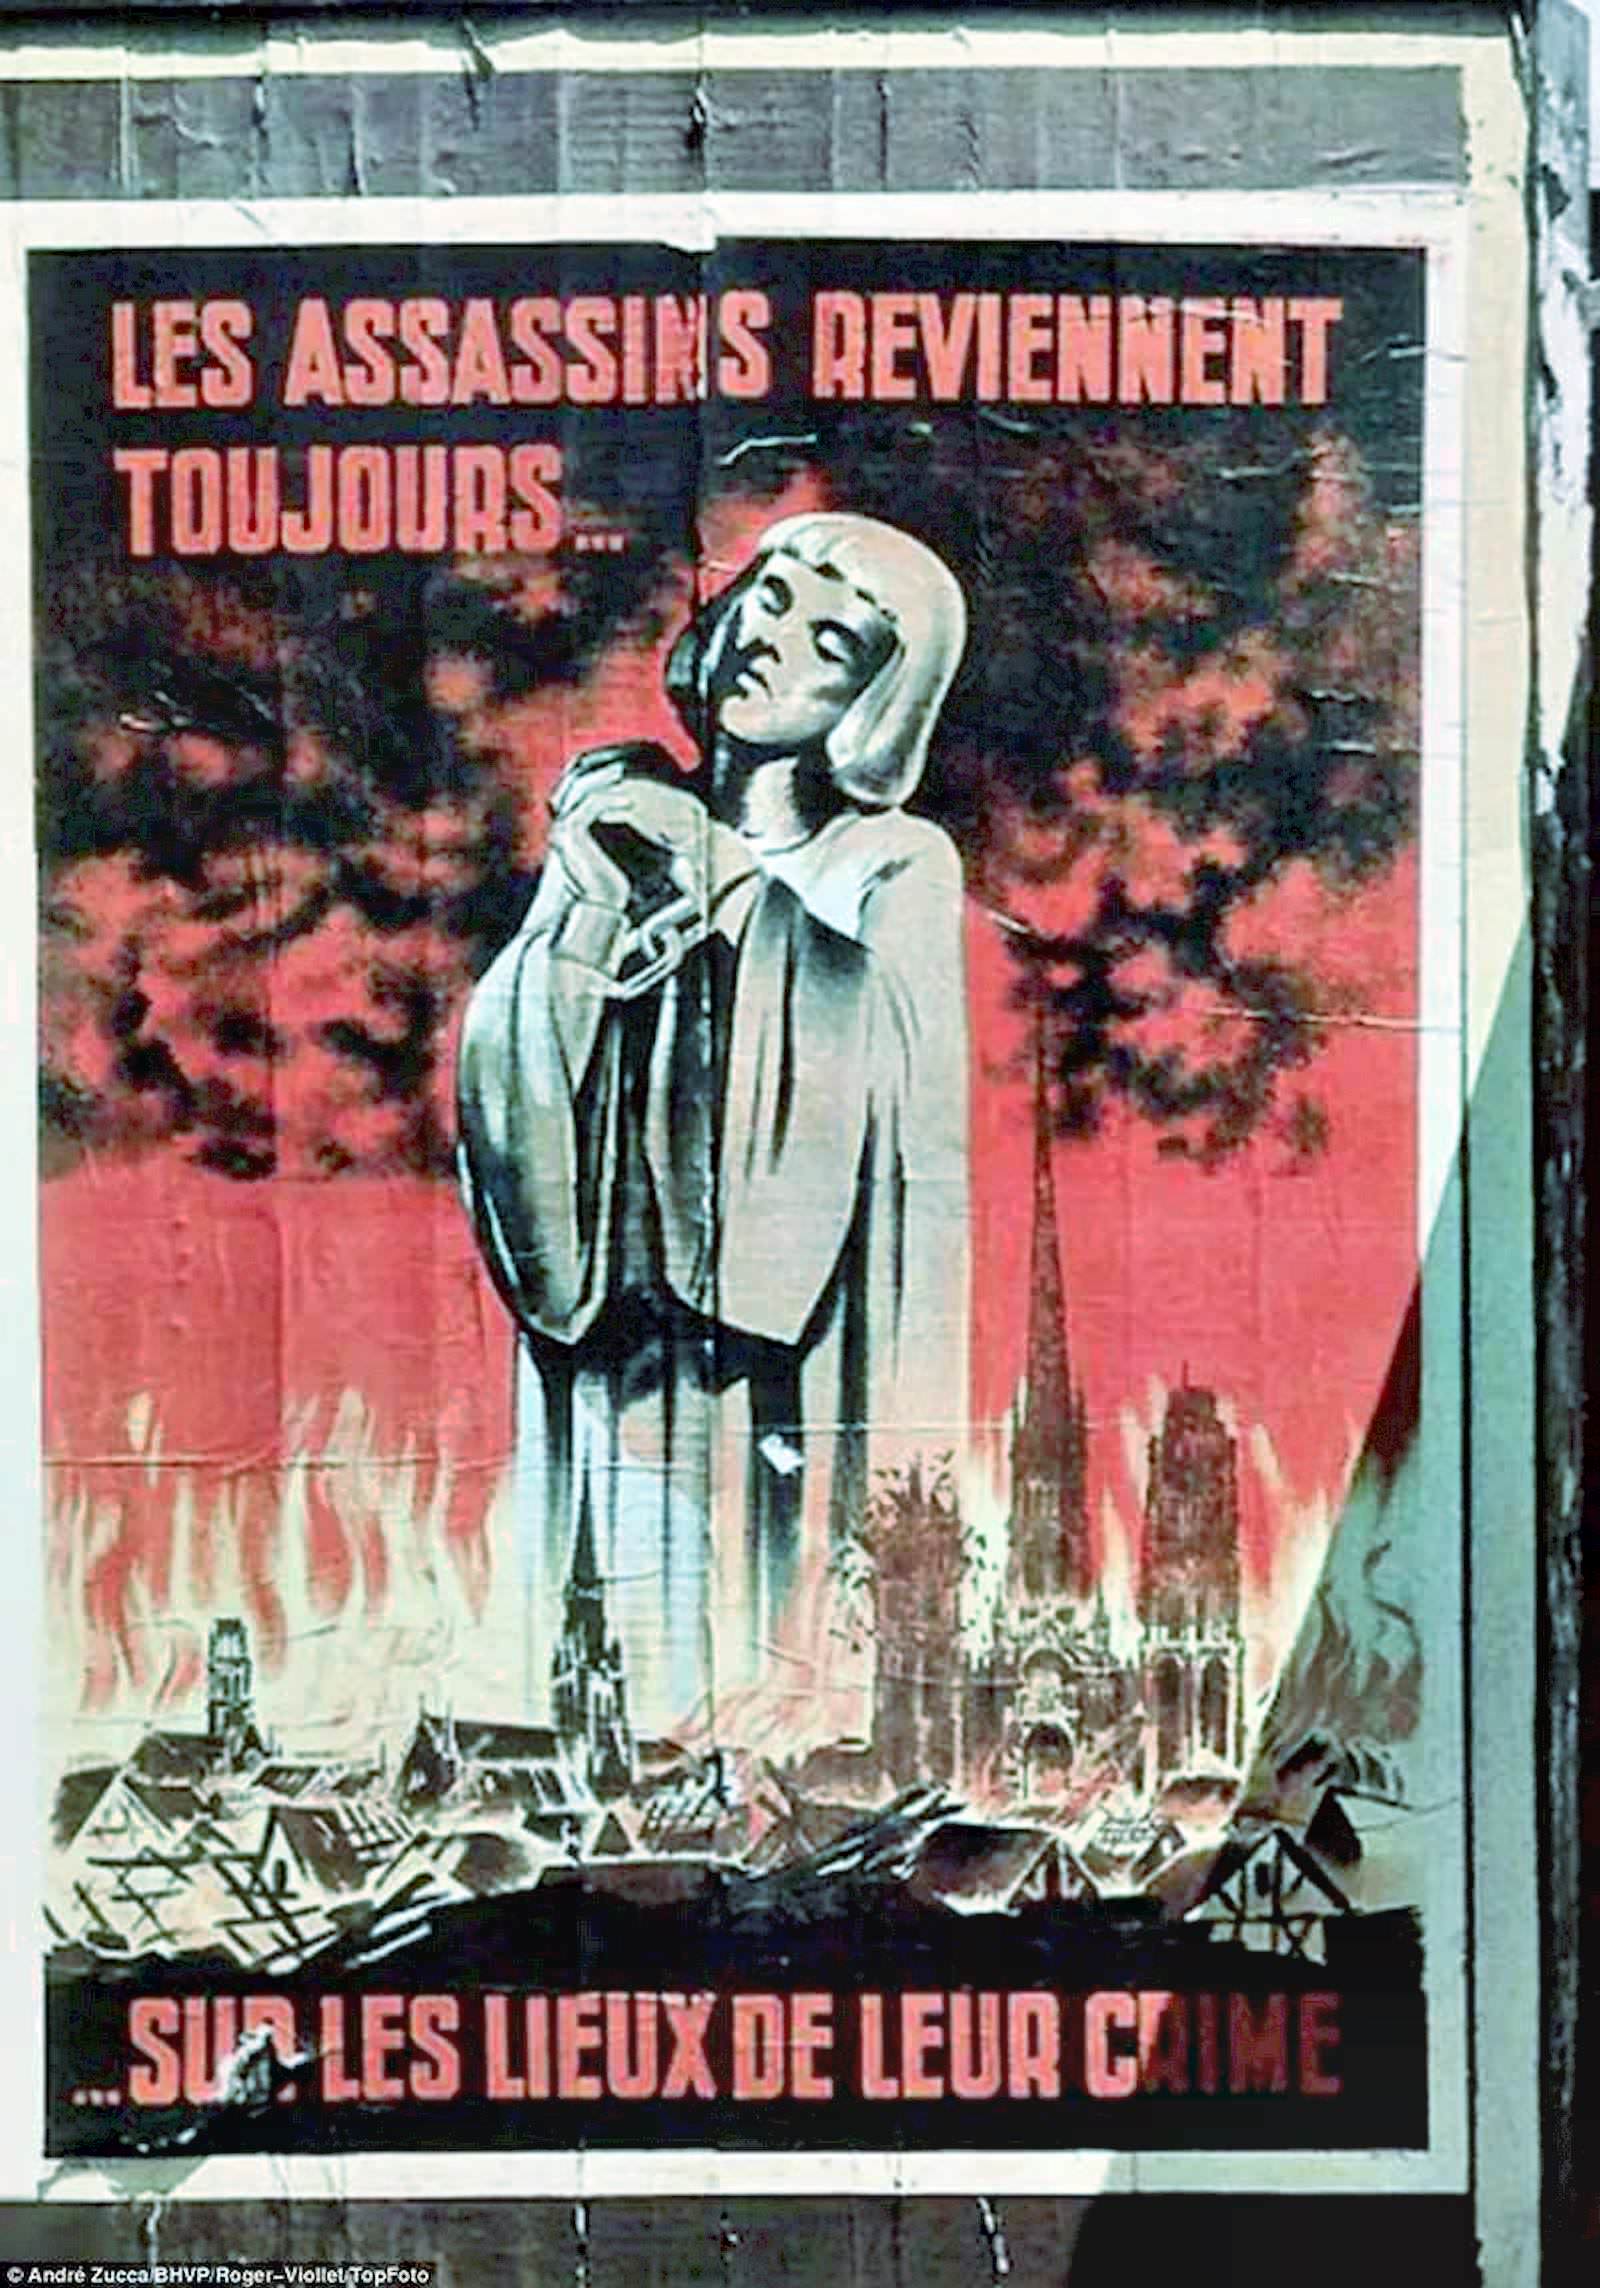 This poster, which reads ‘Assassins Always Return to the Scene of their Crime’, shows Joan of Arc kneeling in prayer, her hands manacled, while below her the town of Rouen burns.